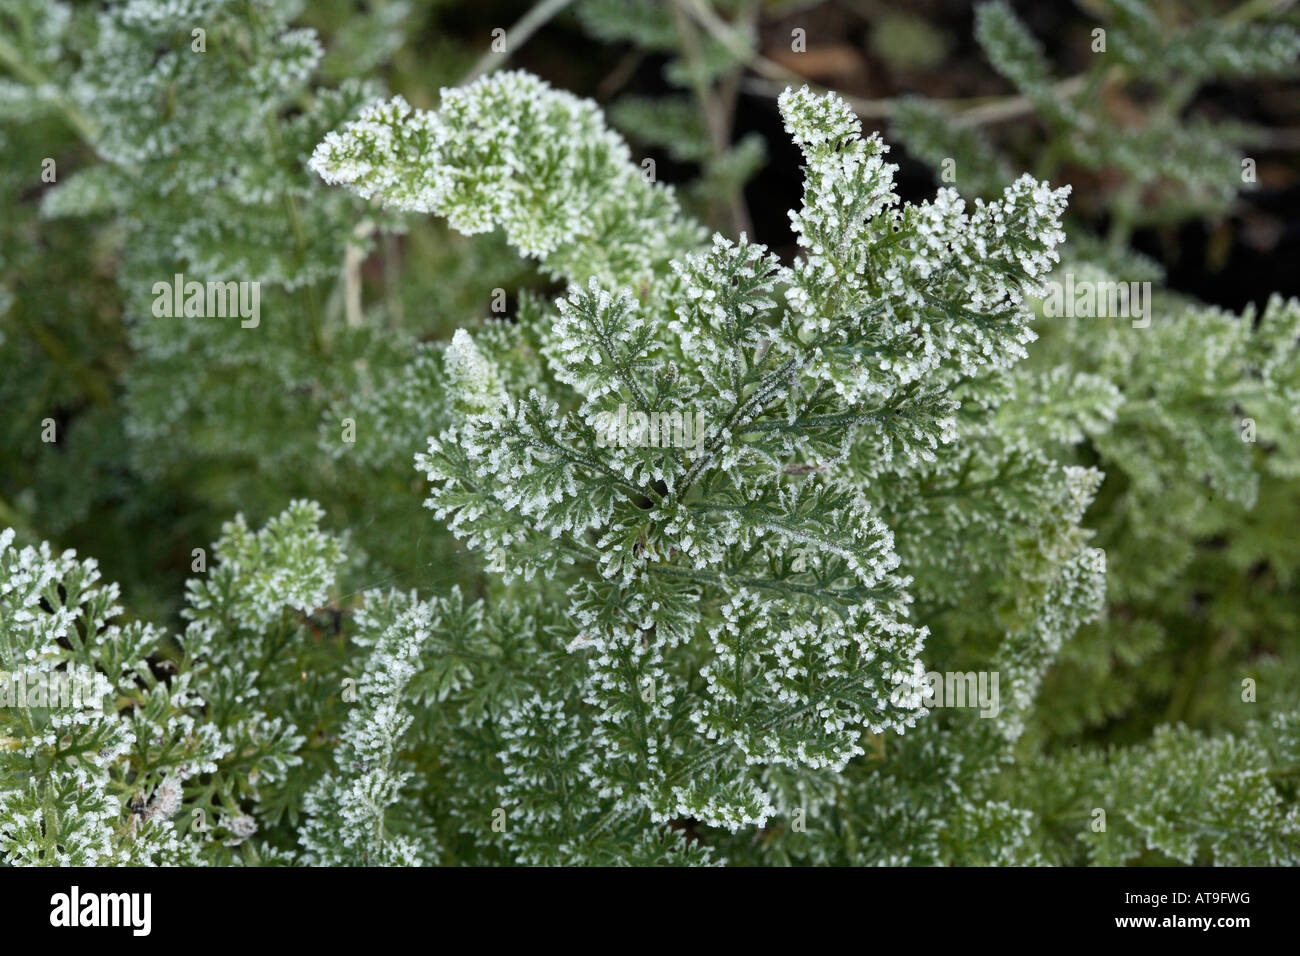 Fluffy green leaf of yarrow with edges frosted with tiny ice crystals Stock Photo